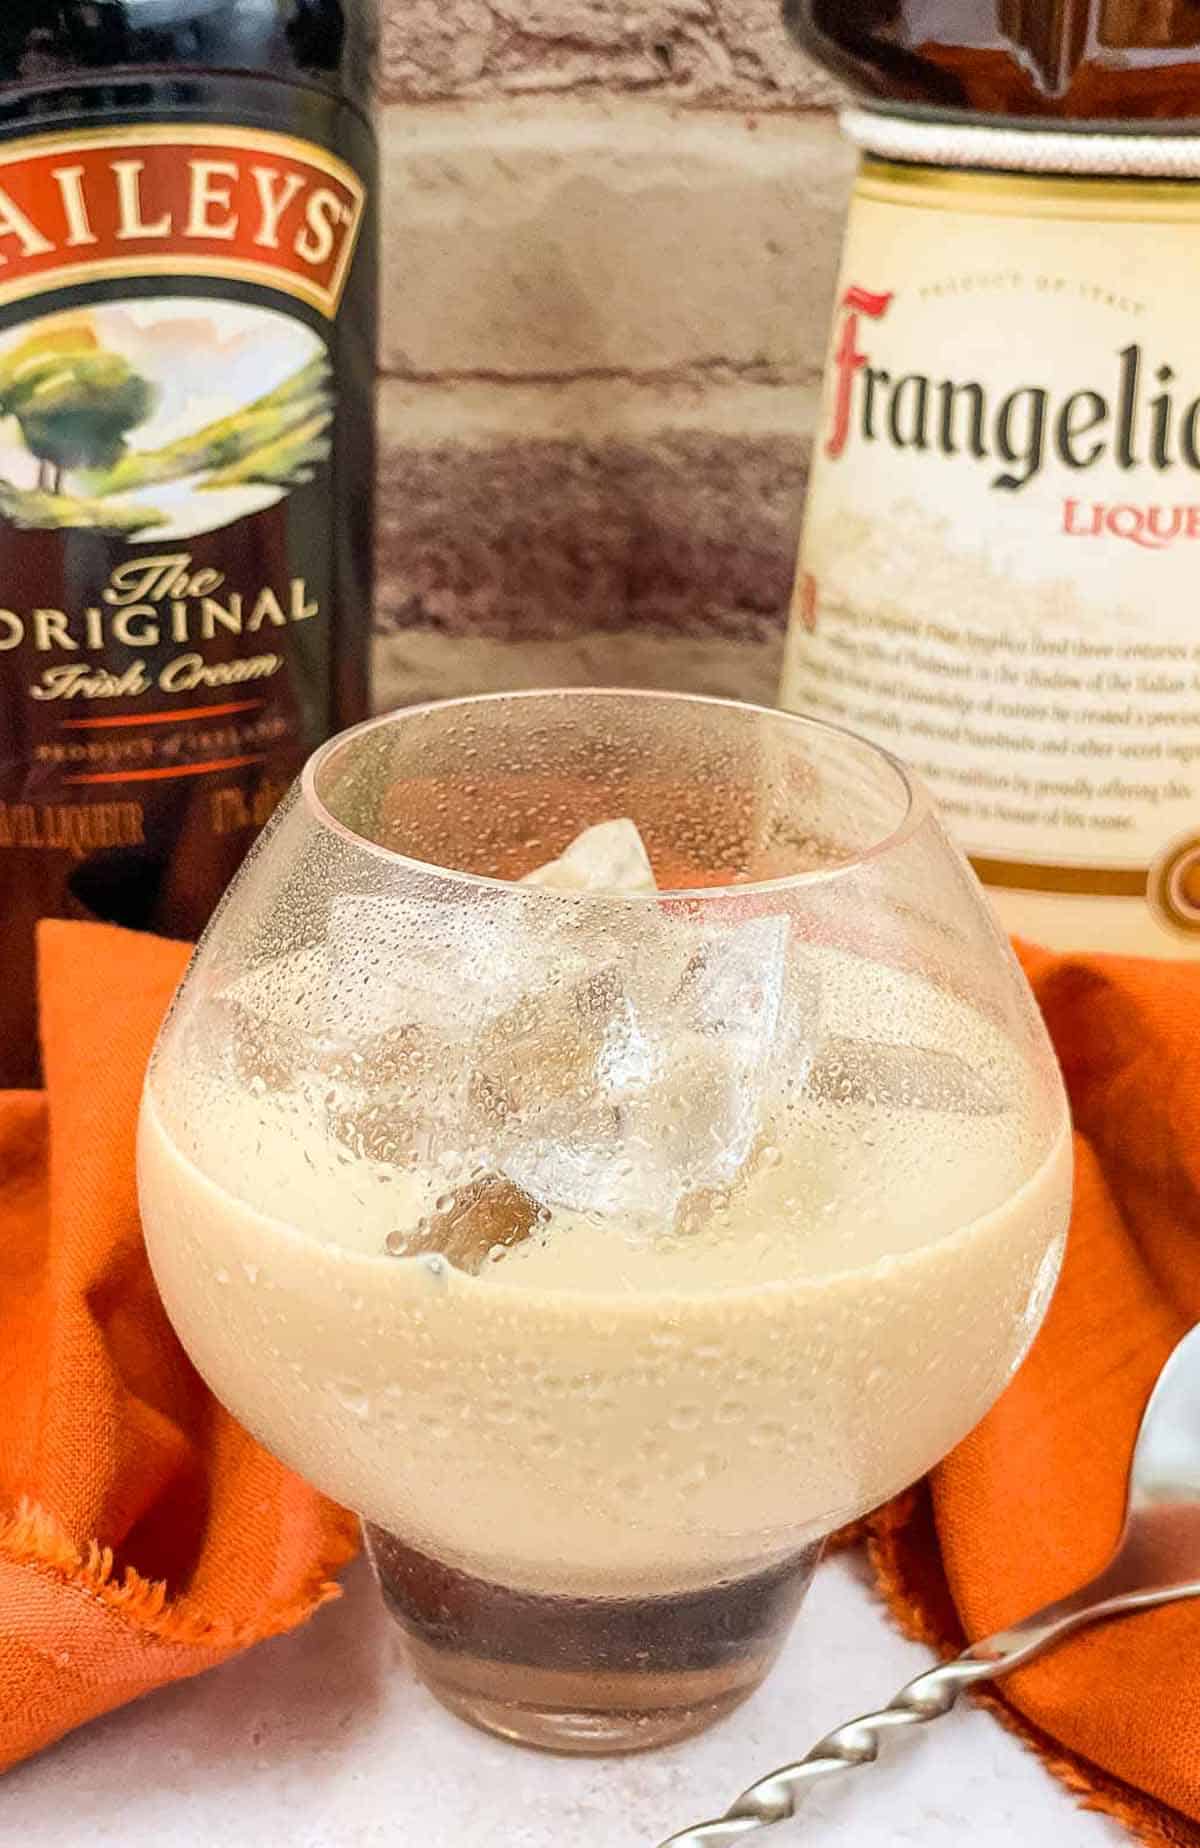 A glass of nutty Irishman on ice, with bottles of Baileys Irish cream and Frangelico liqueur in the background.